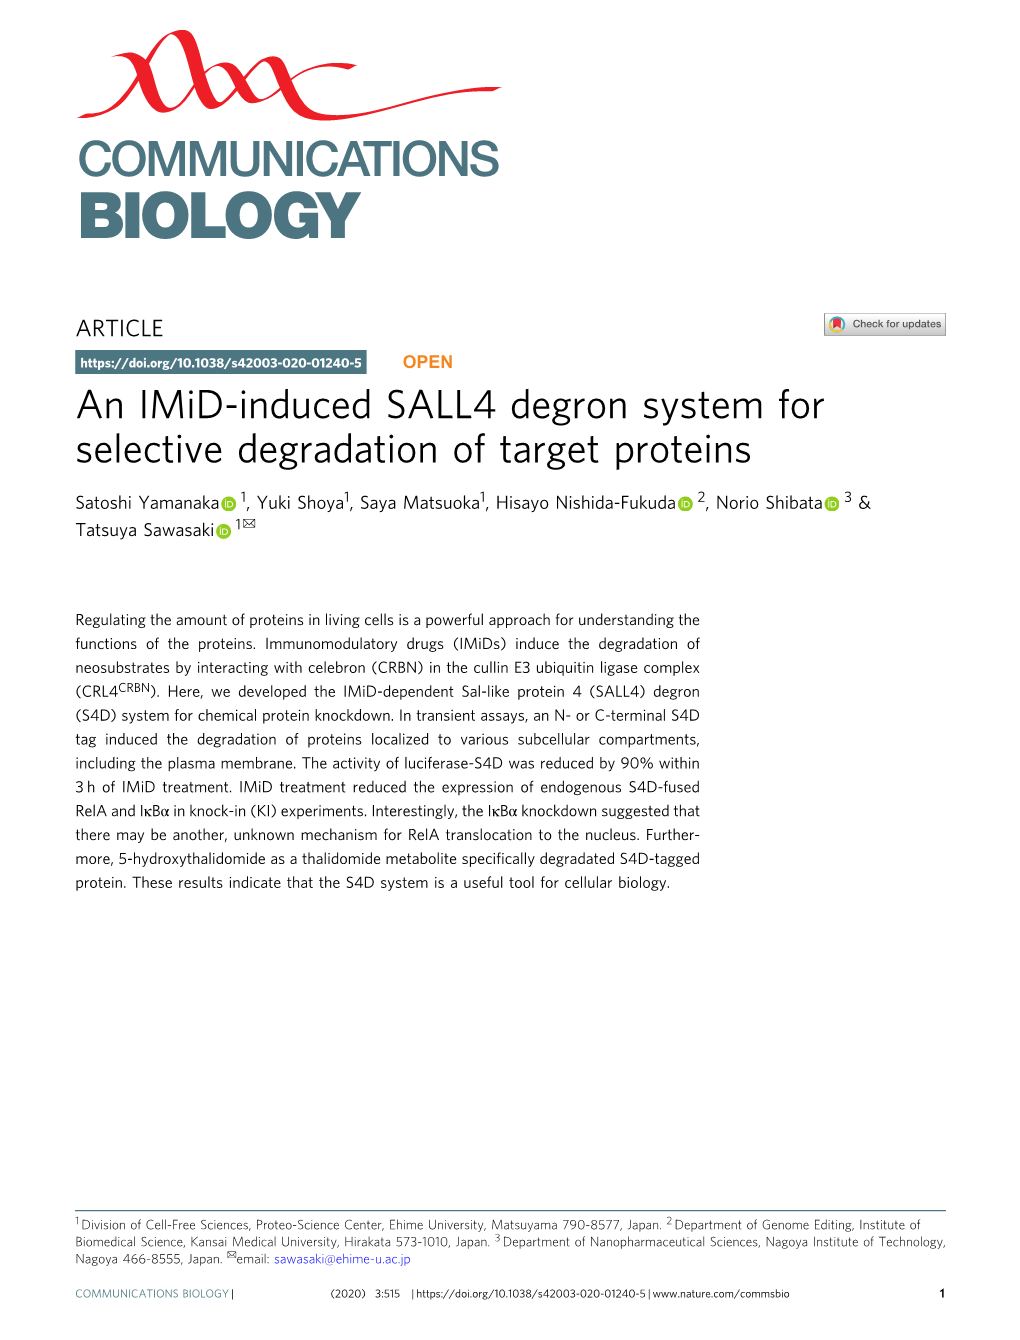 An Imid-Induced SALL4 Degron System for Selective Degradation of Target Proteins